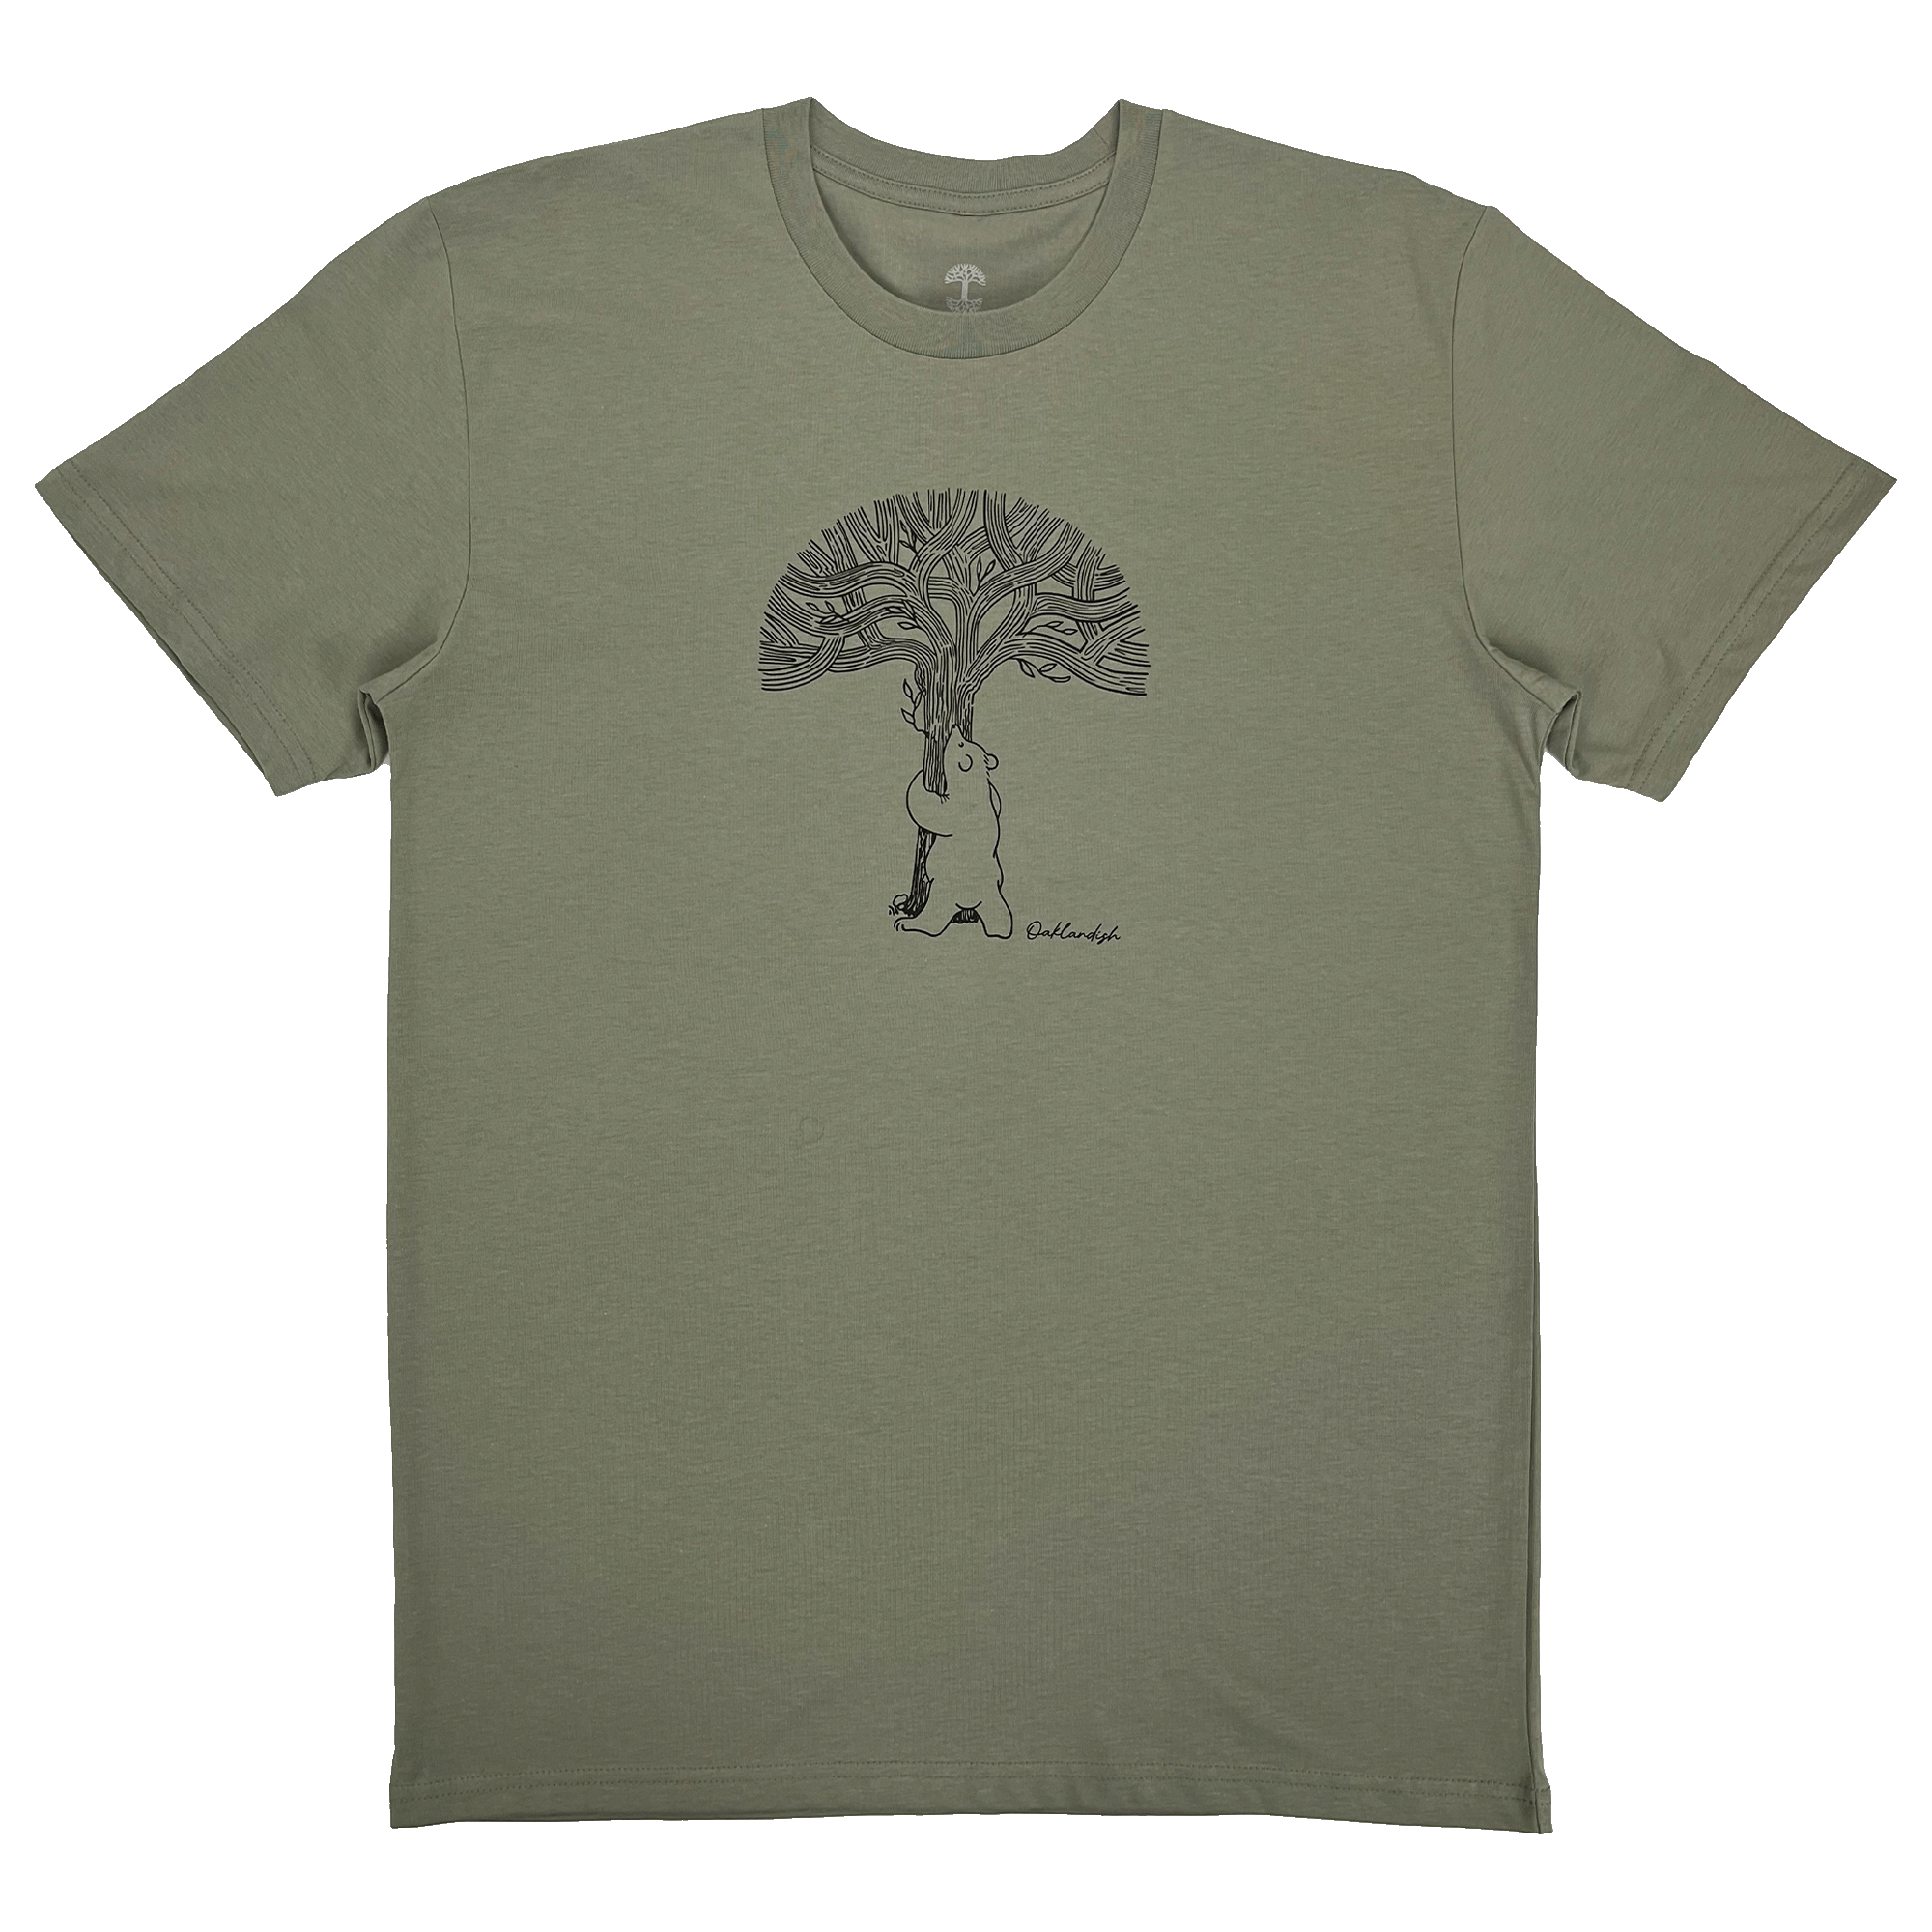 Eucalyptus green t-shirt with line graphic of a bear hugging a tree representing Oaklandish with Oaklandish wordmark.